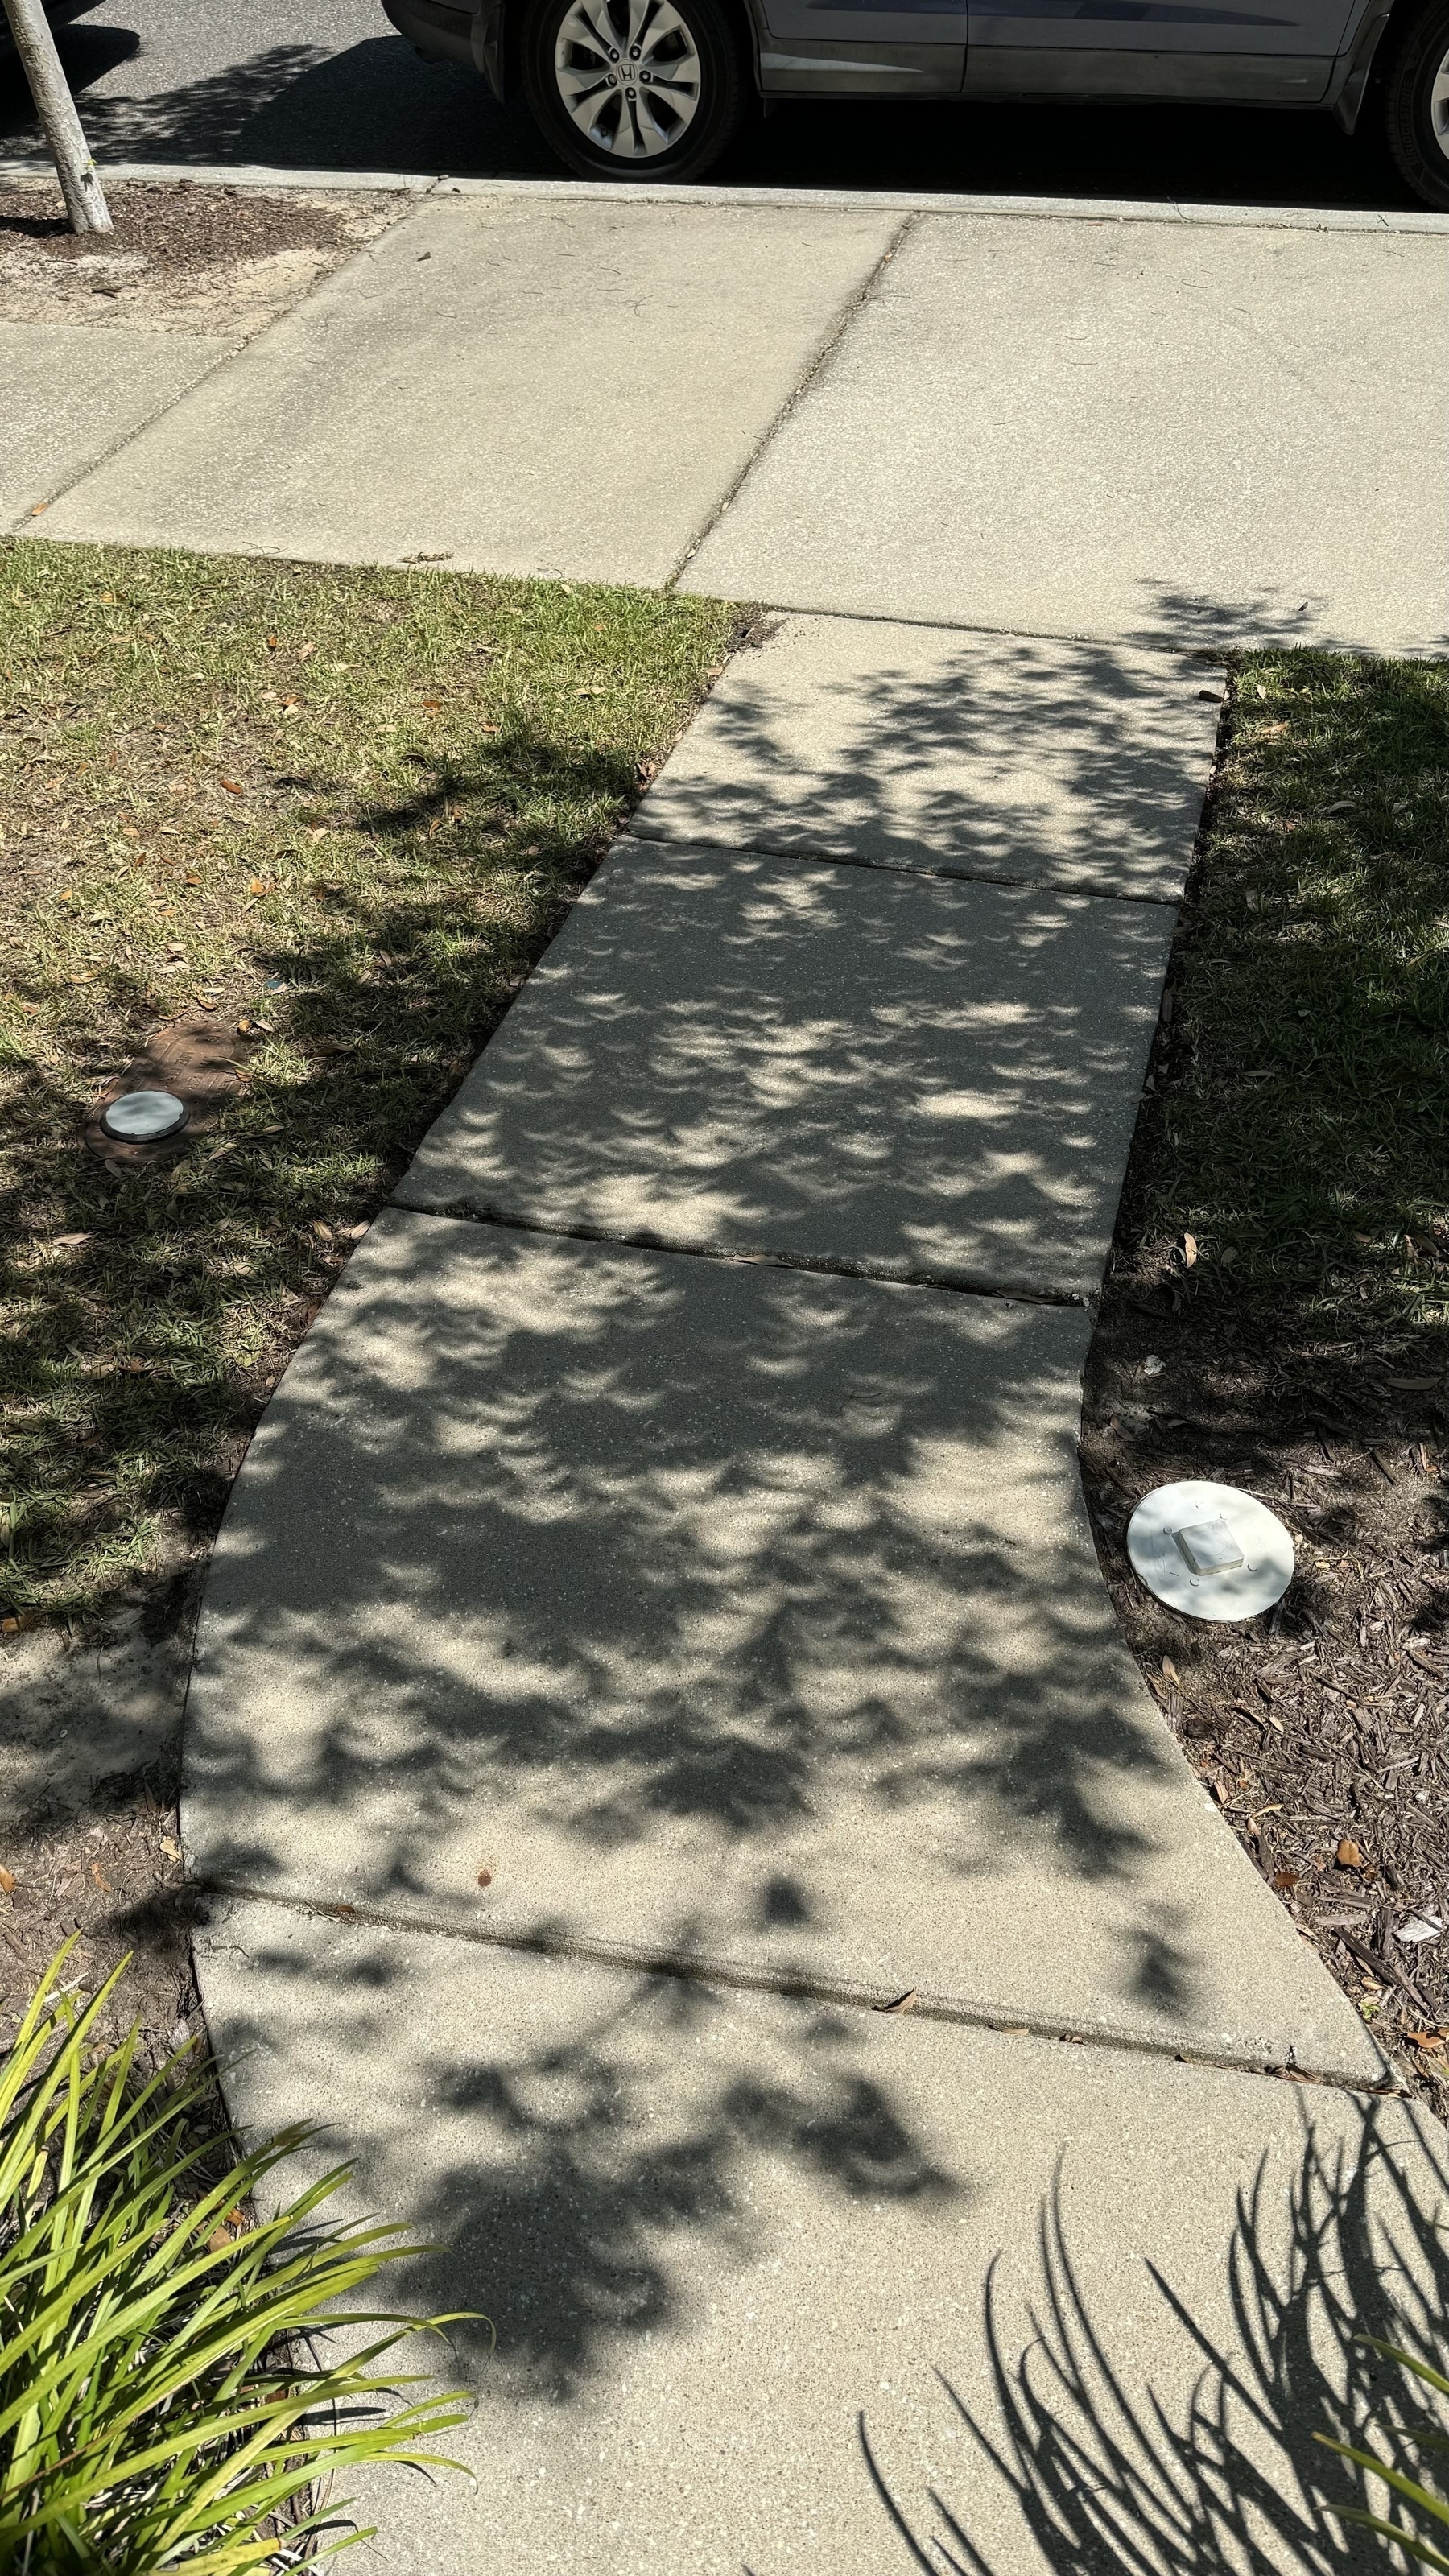 shadows produced by a tree during the eclipse.